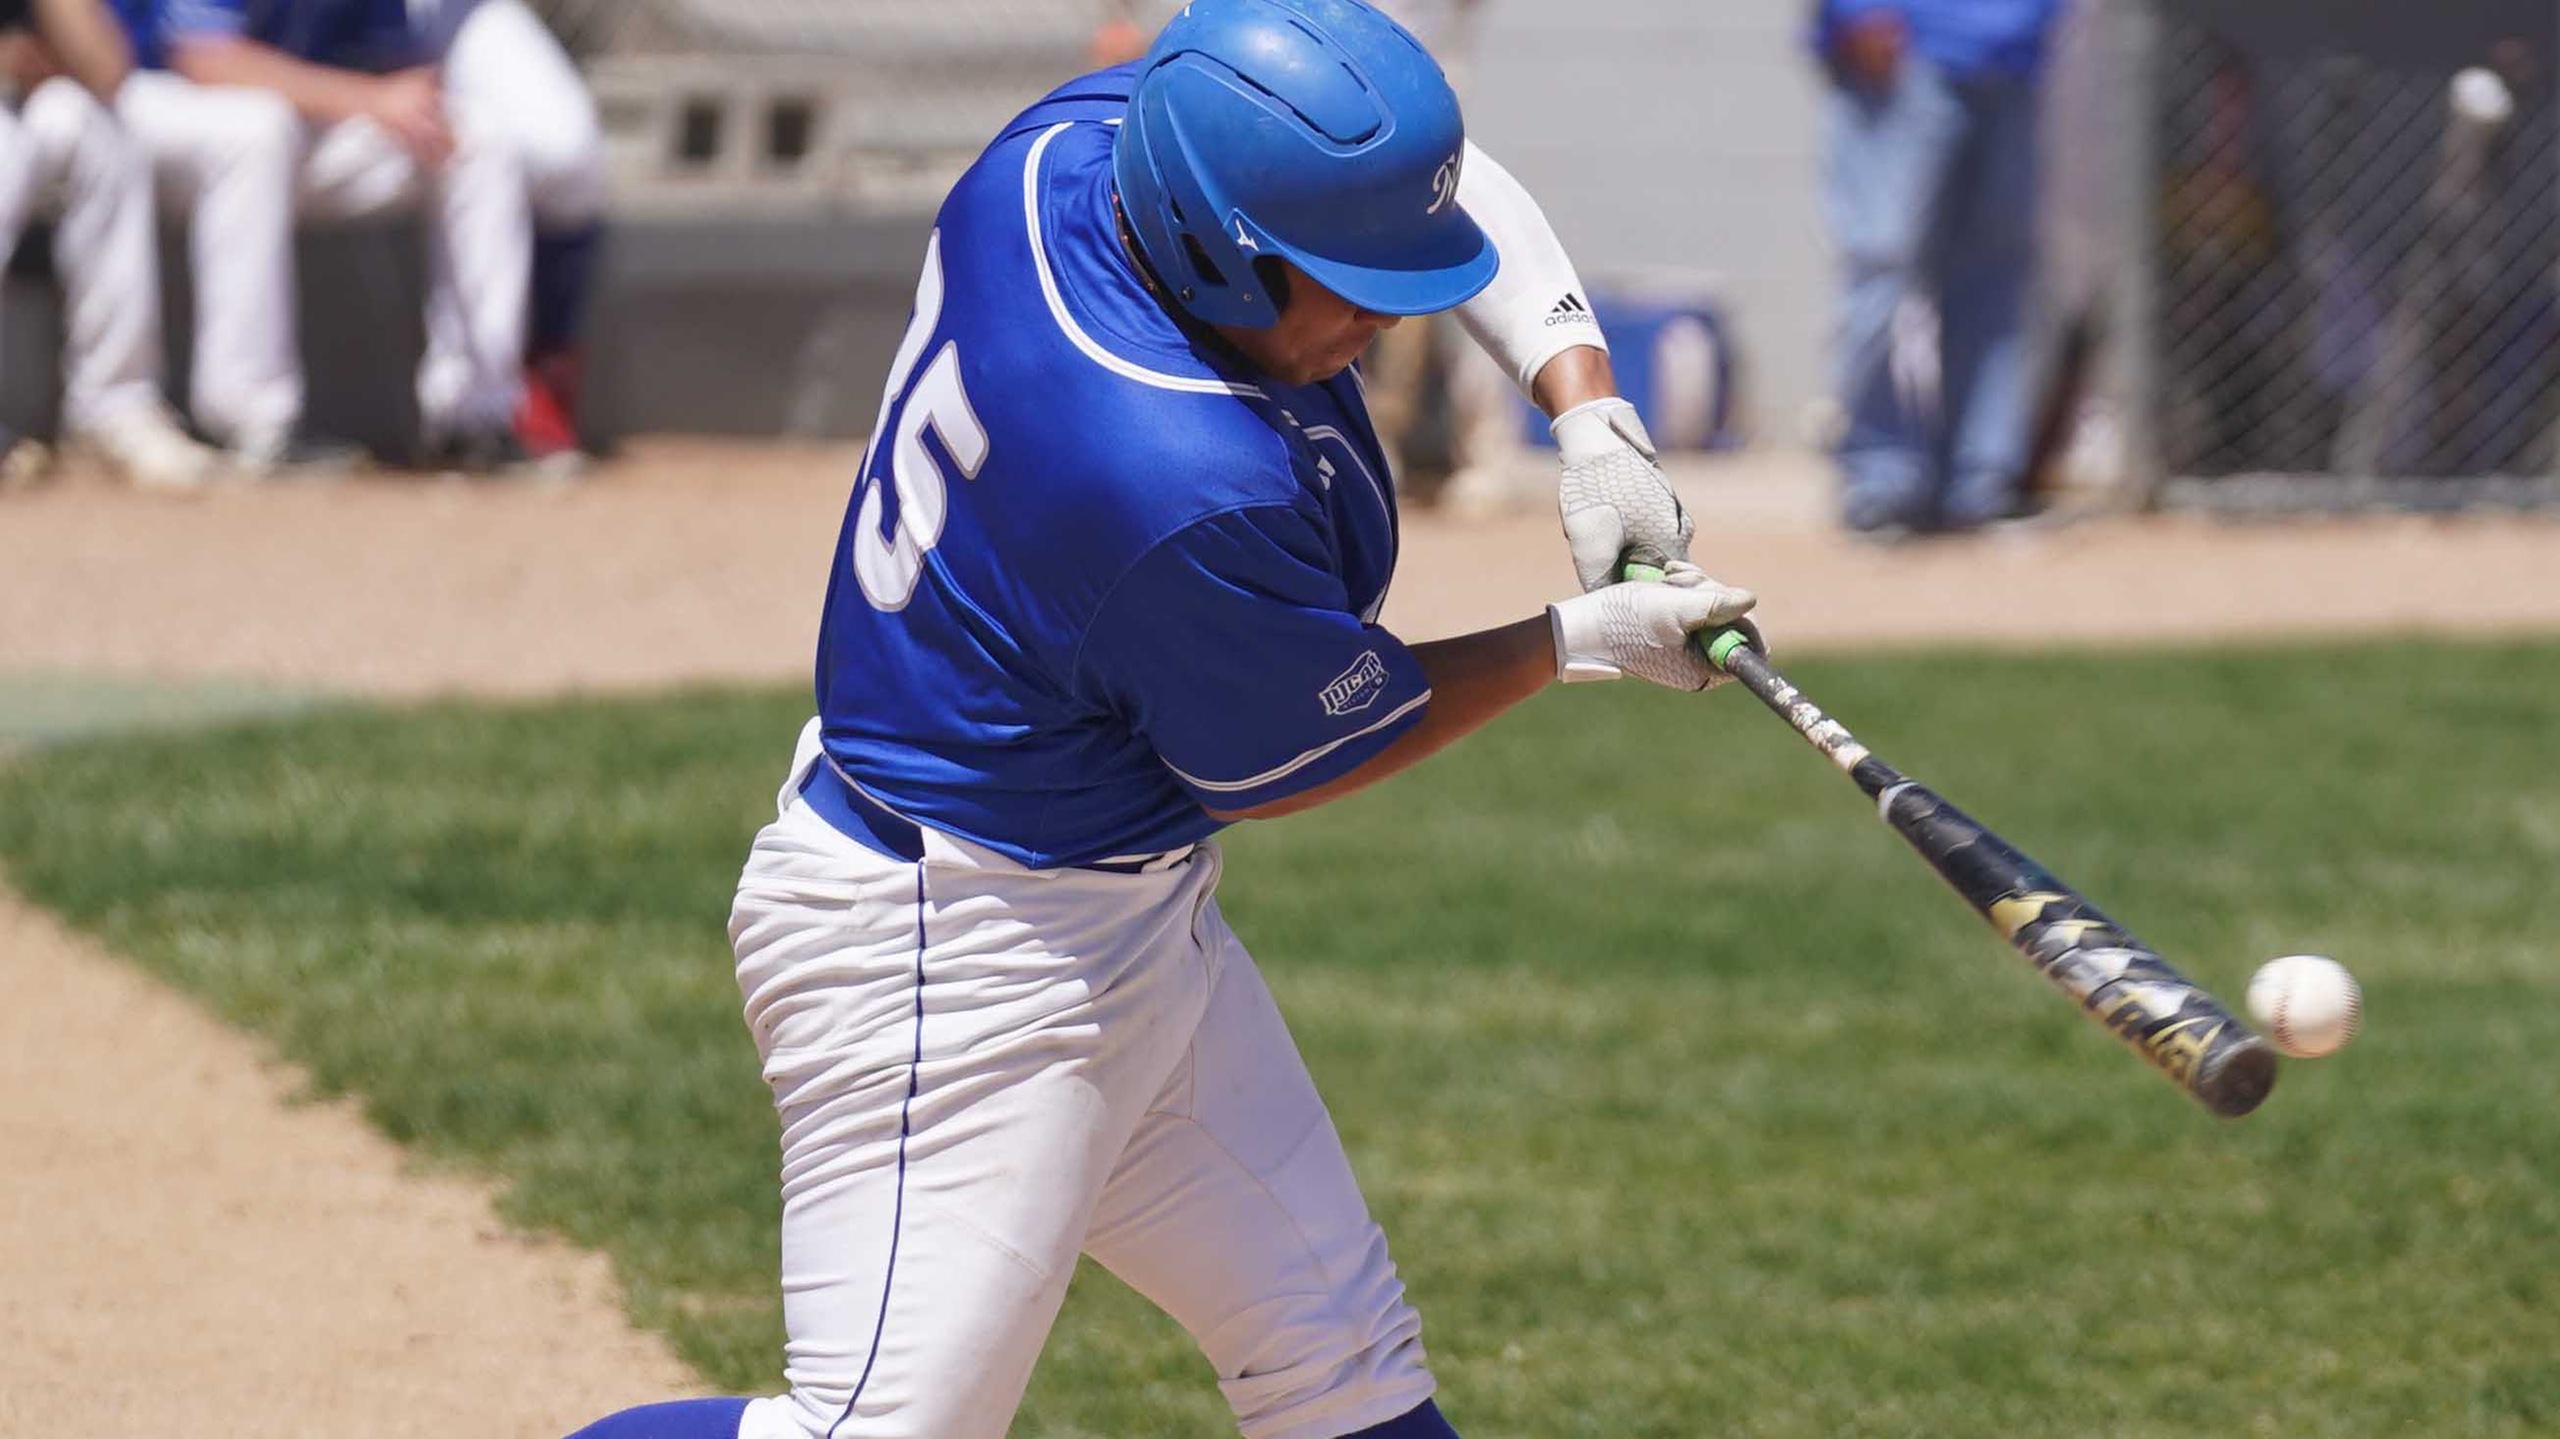 MCC Baseball loses opening district game on extra-inning walk-off homer